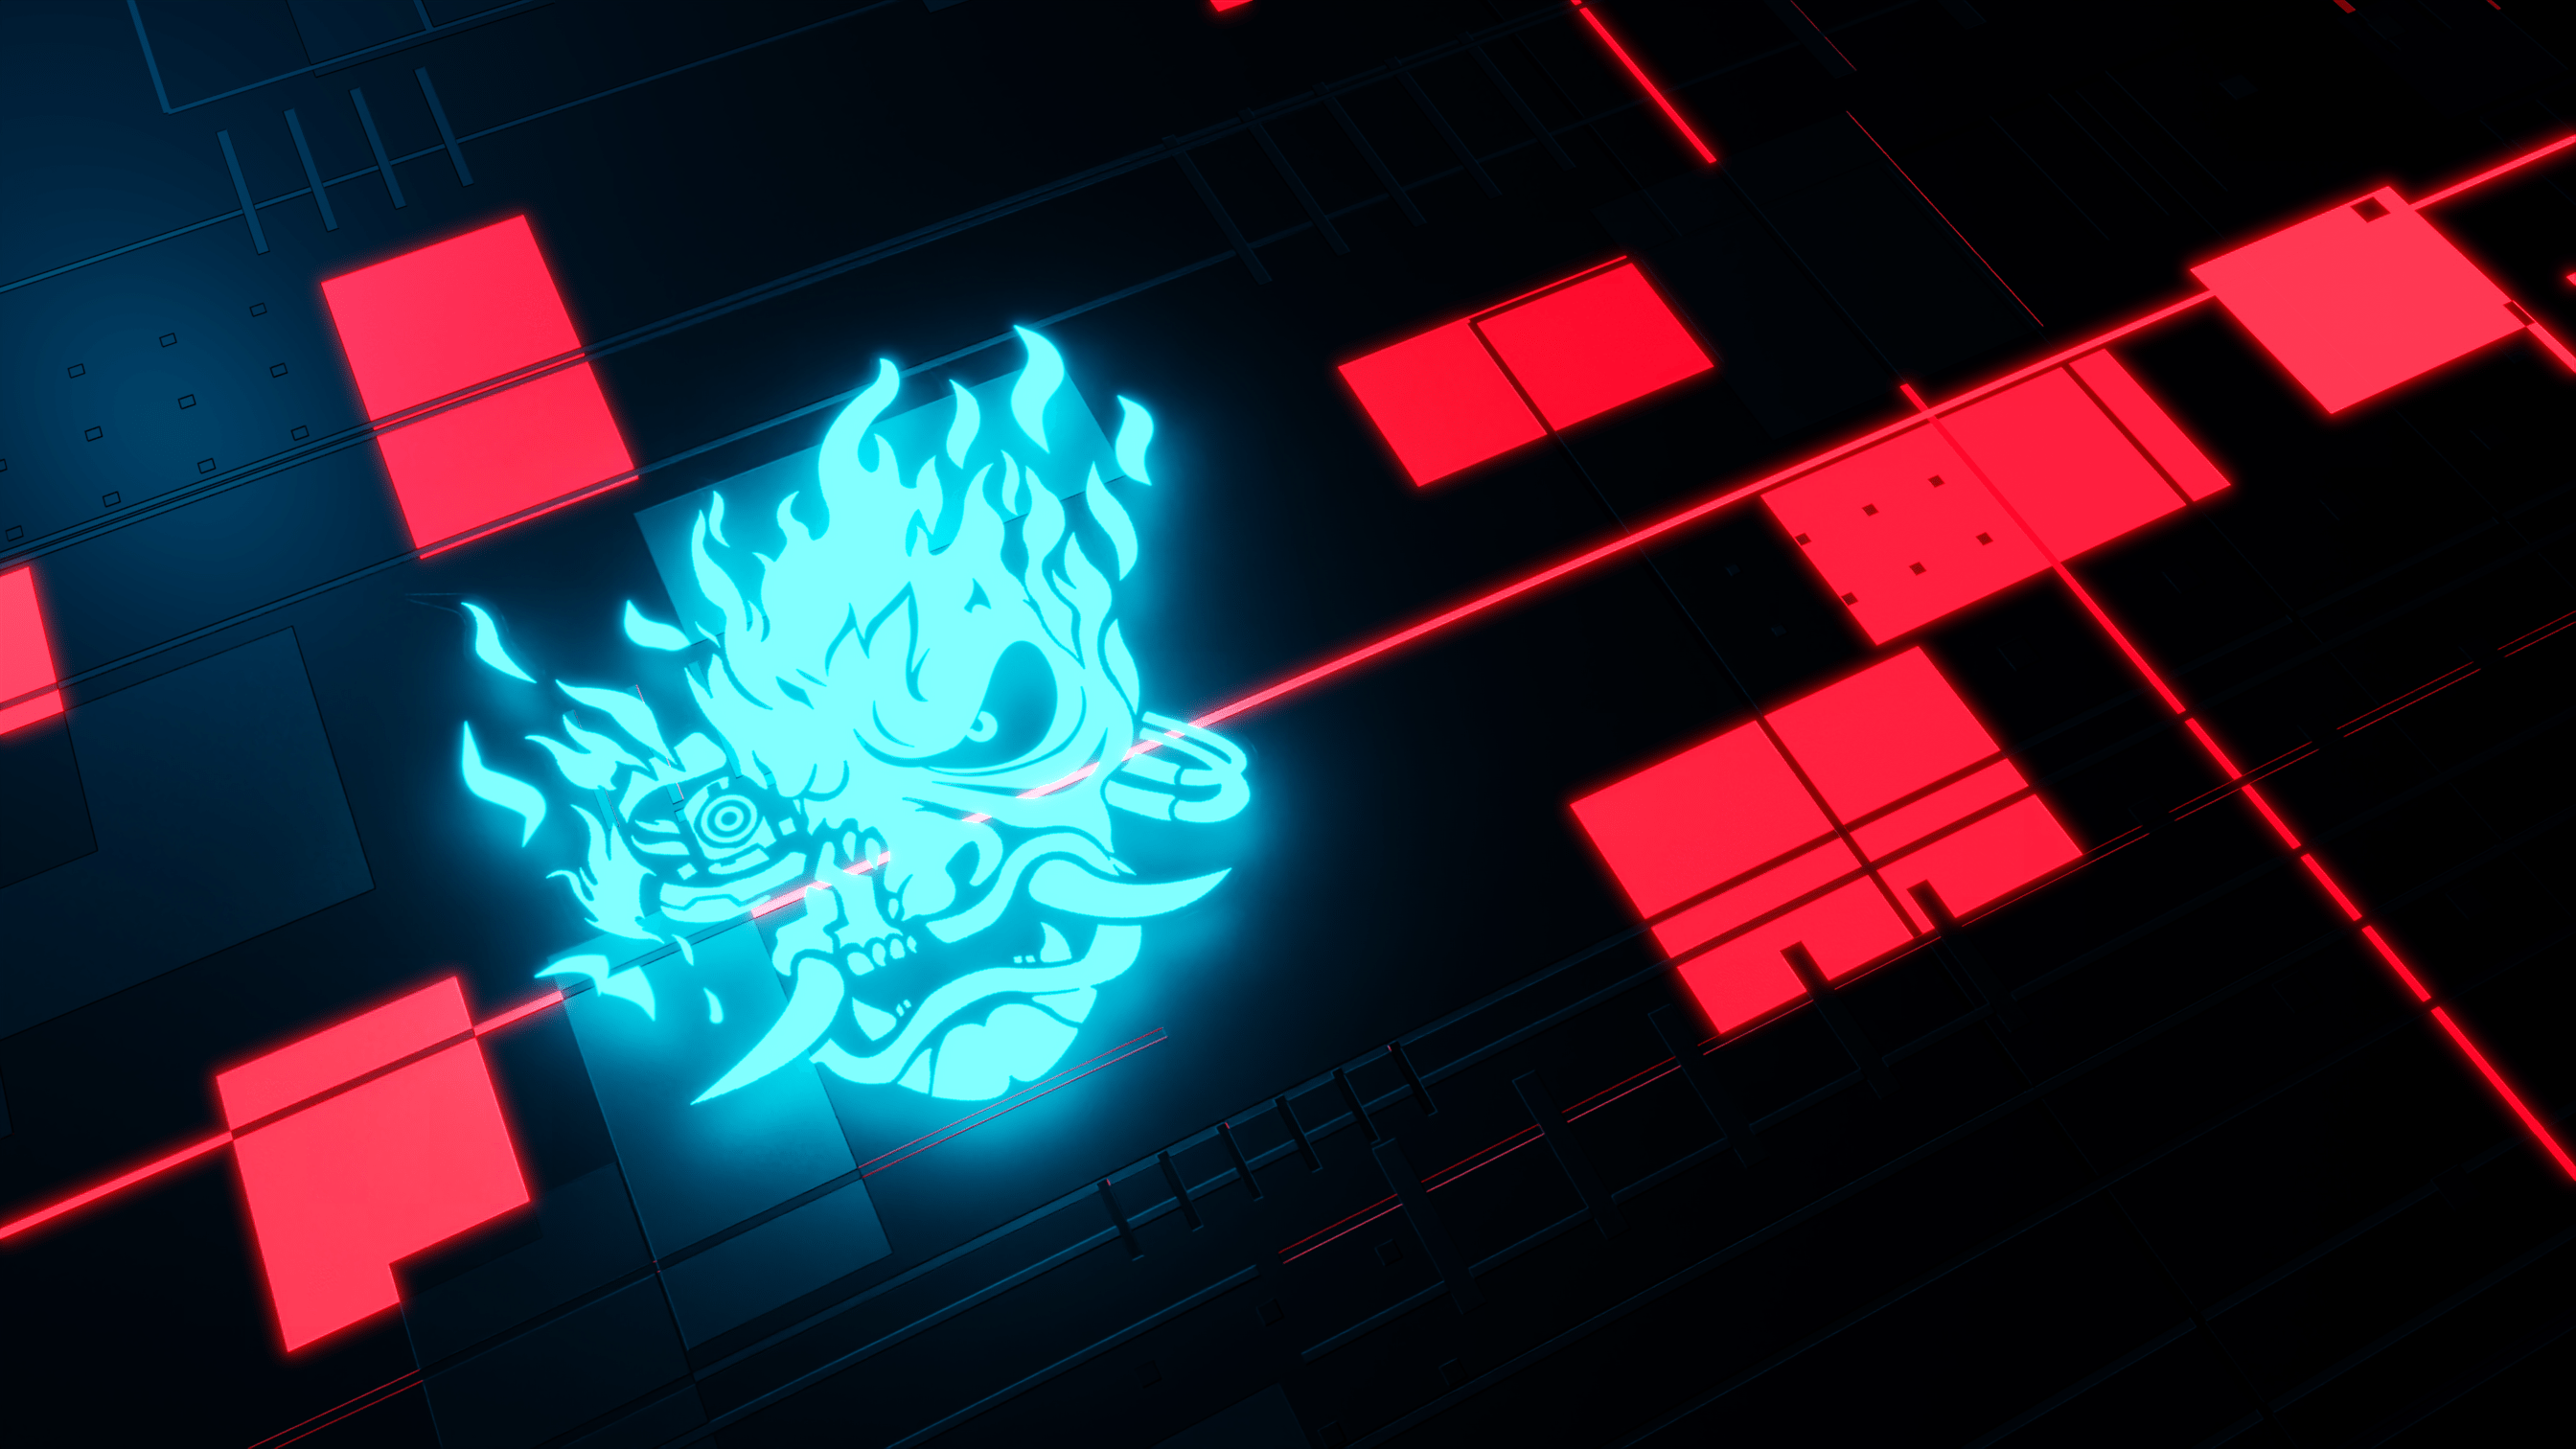 A blue fire demon on a red and black background - Cyberpunk